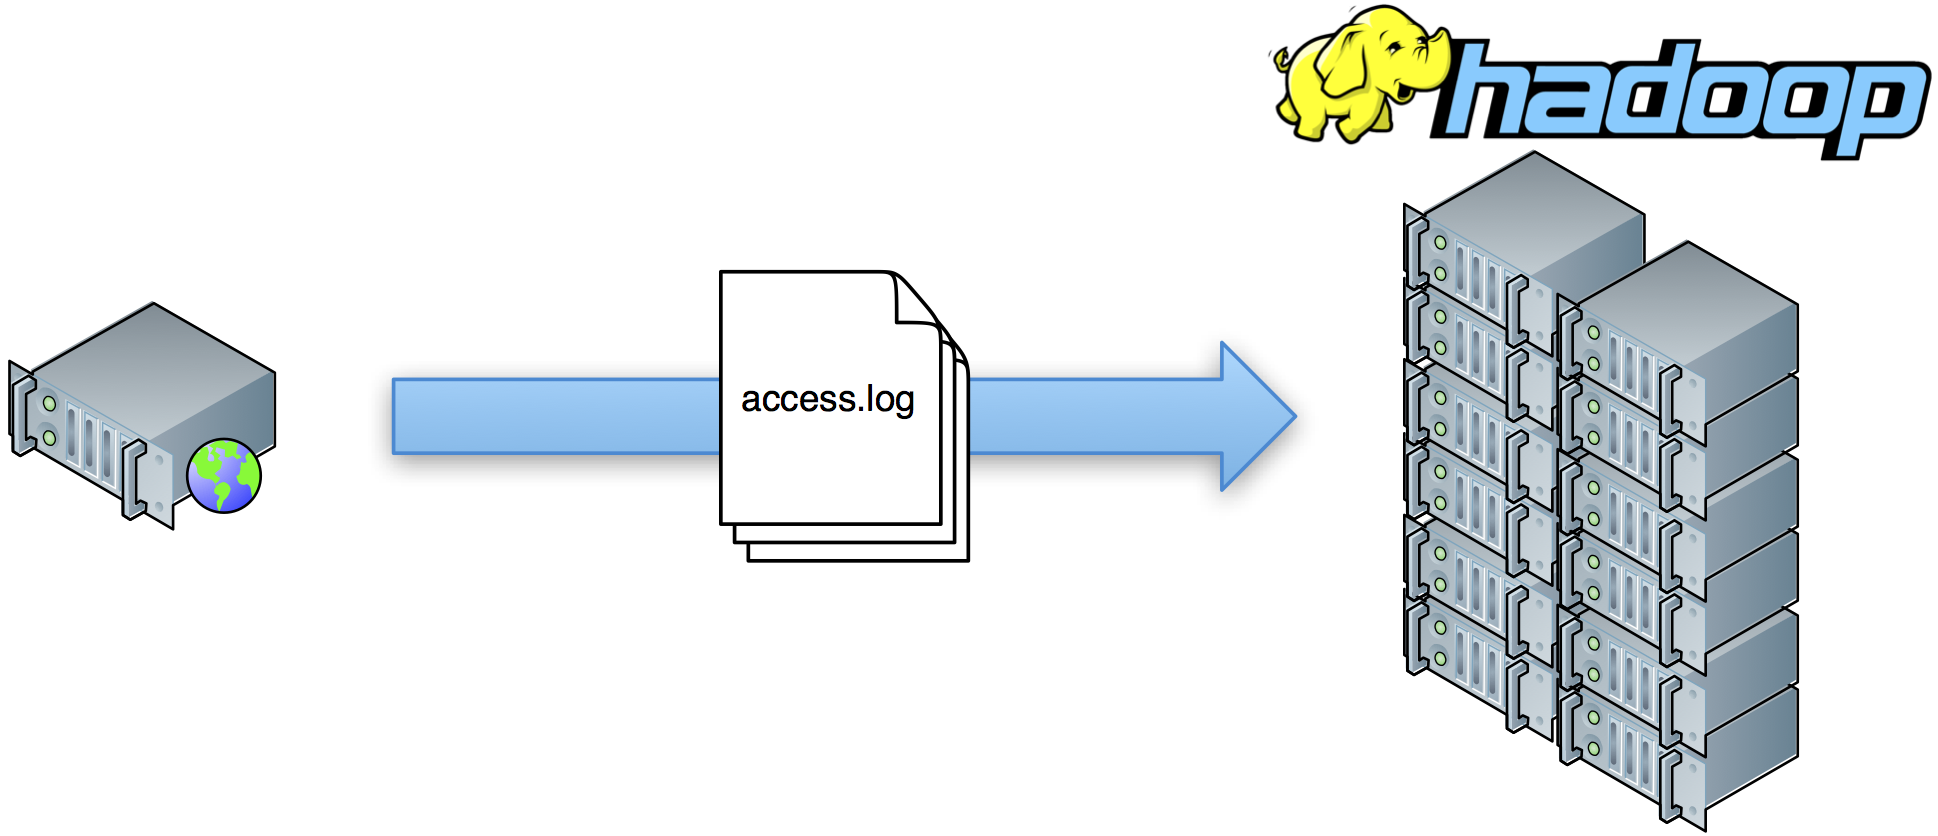 Traditional method of collecting click stream data on Hadoop